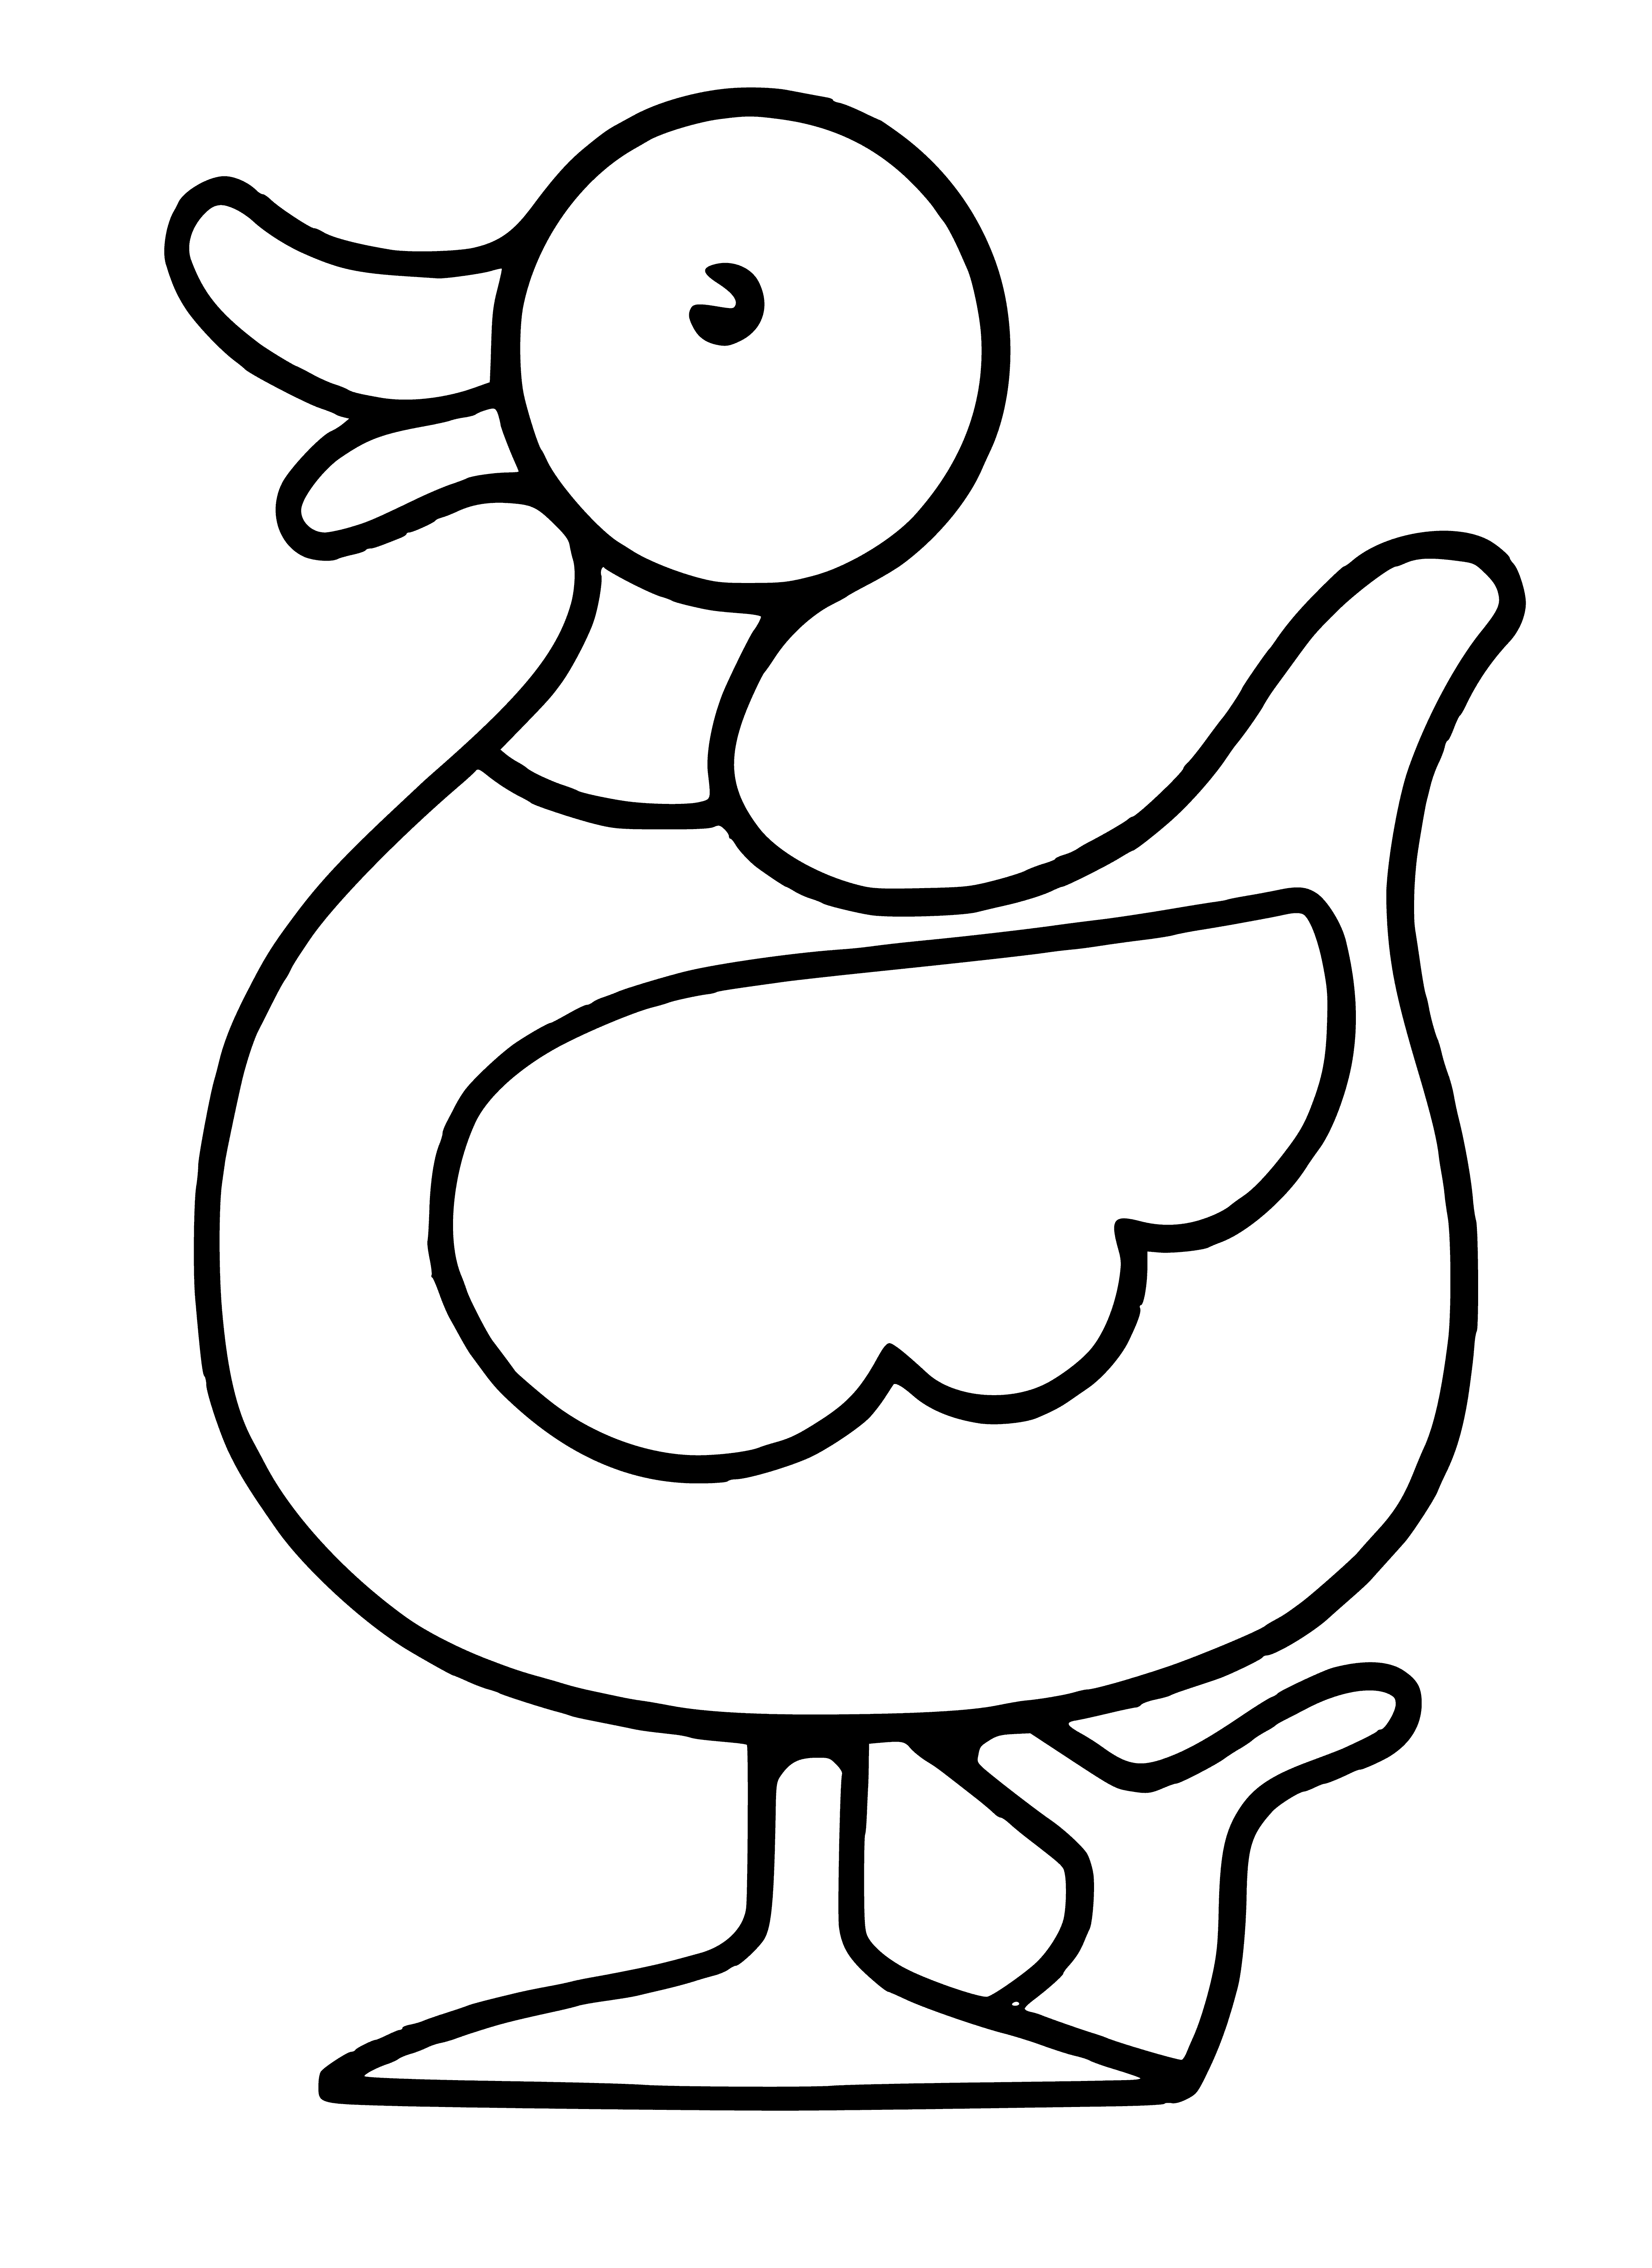 coloring page: Yellow duck with black beak stands in center; to l. is green lily pad, to r. is red balloon.